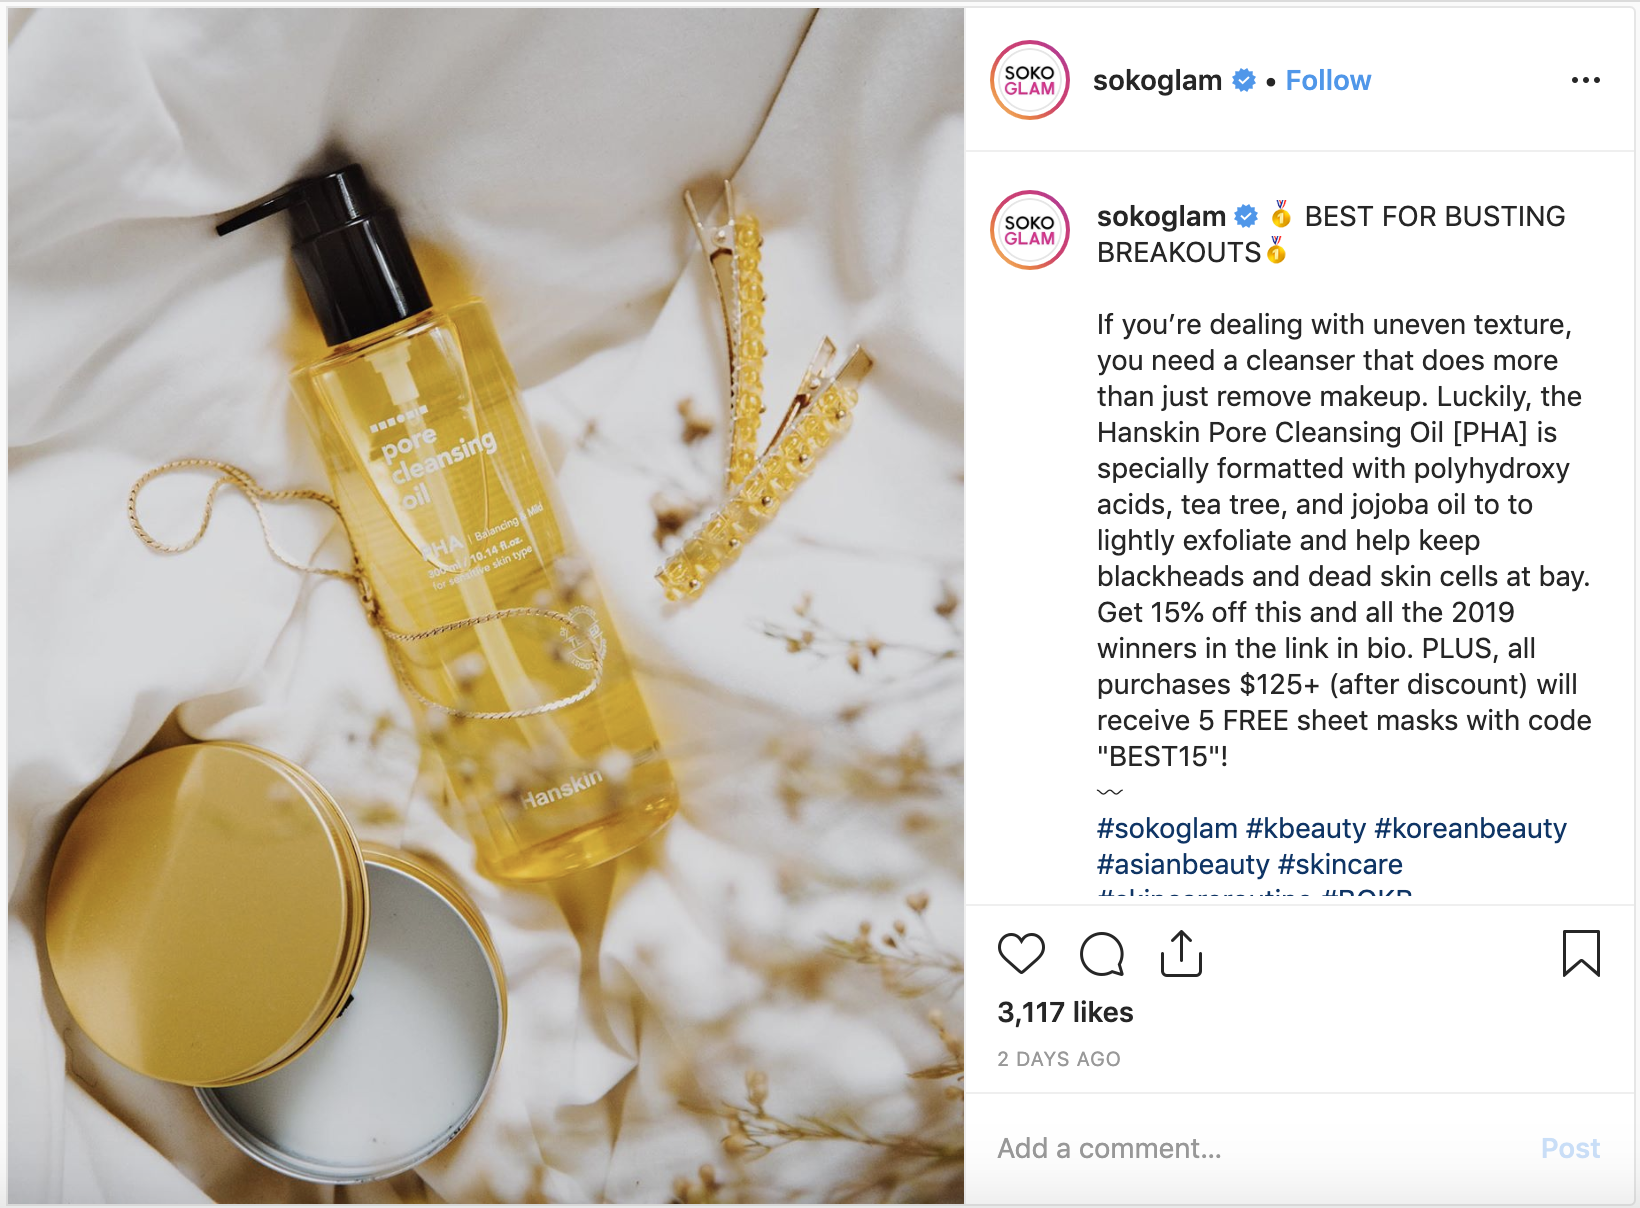 Instagram post with an image of a beauty product with caption copy the describes the product's benefits